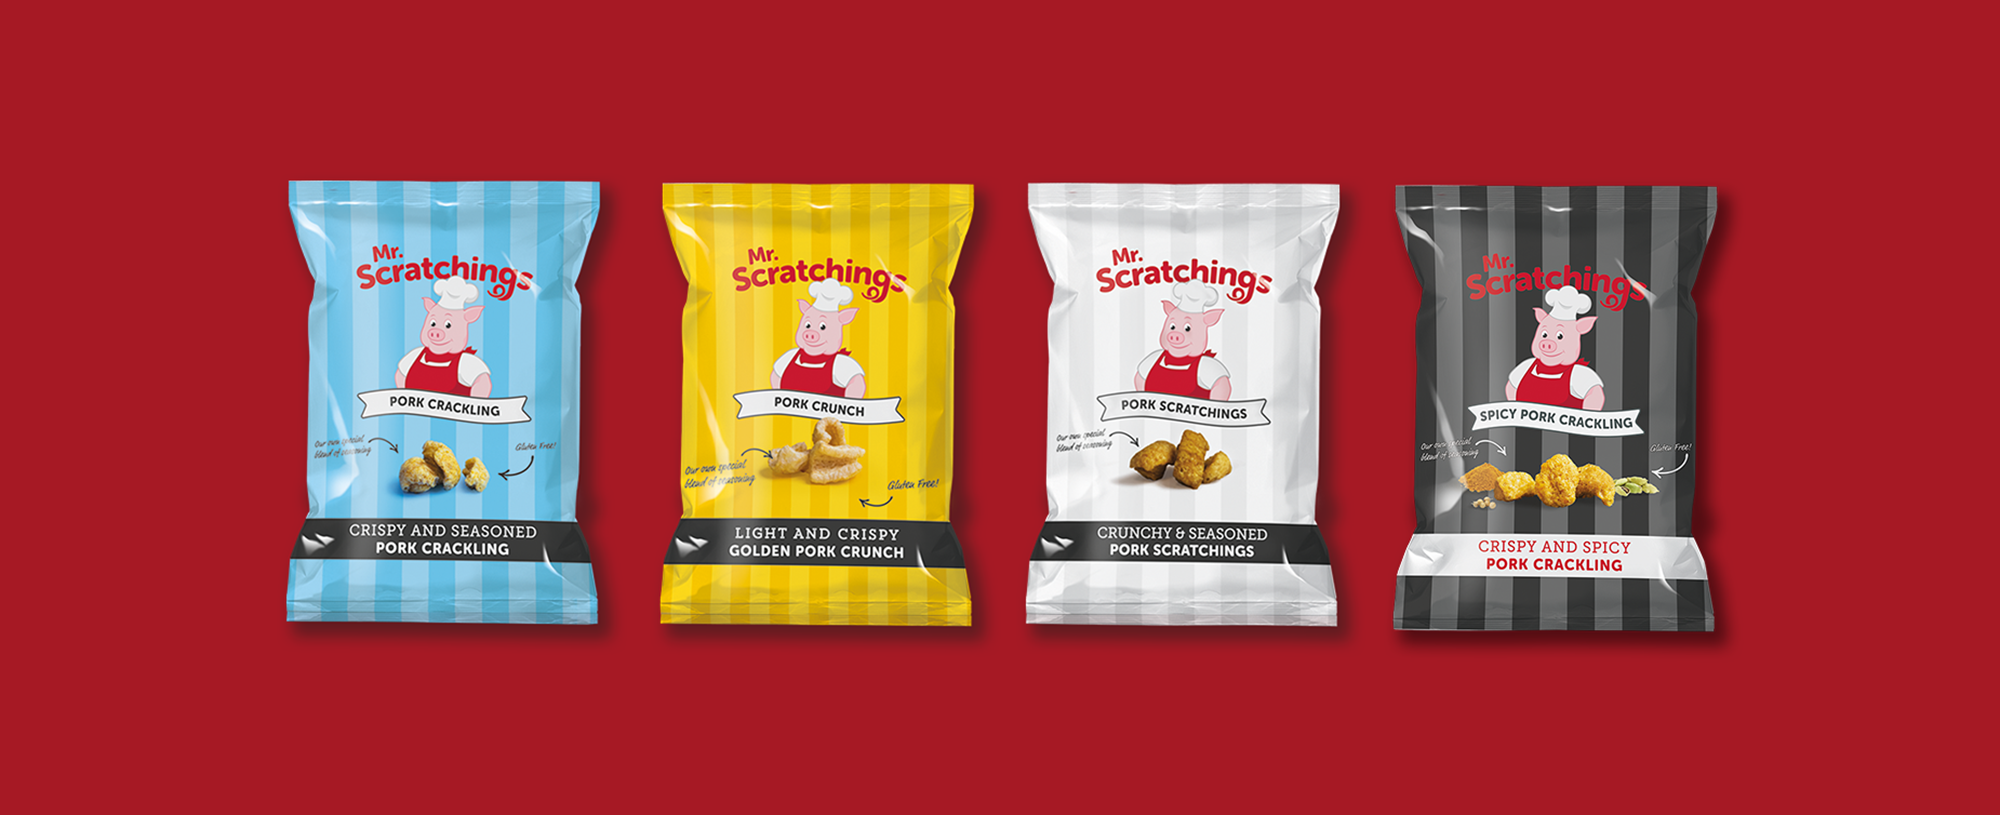 Mr Scratchings Flavoured Packaging designed by Doncaster's leading creative agency, Moirae Creative 